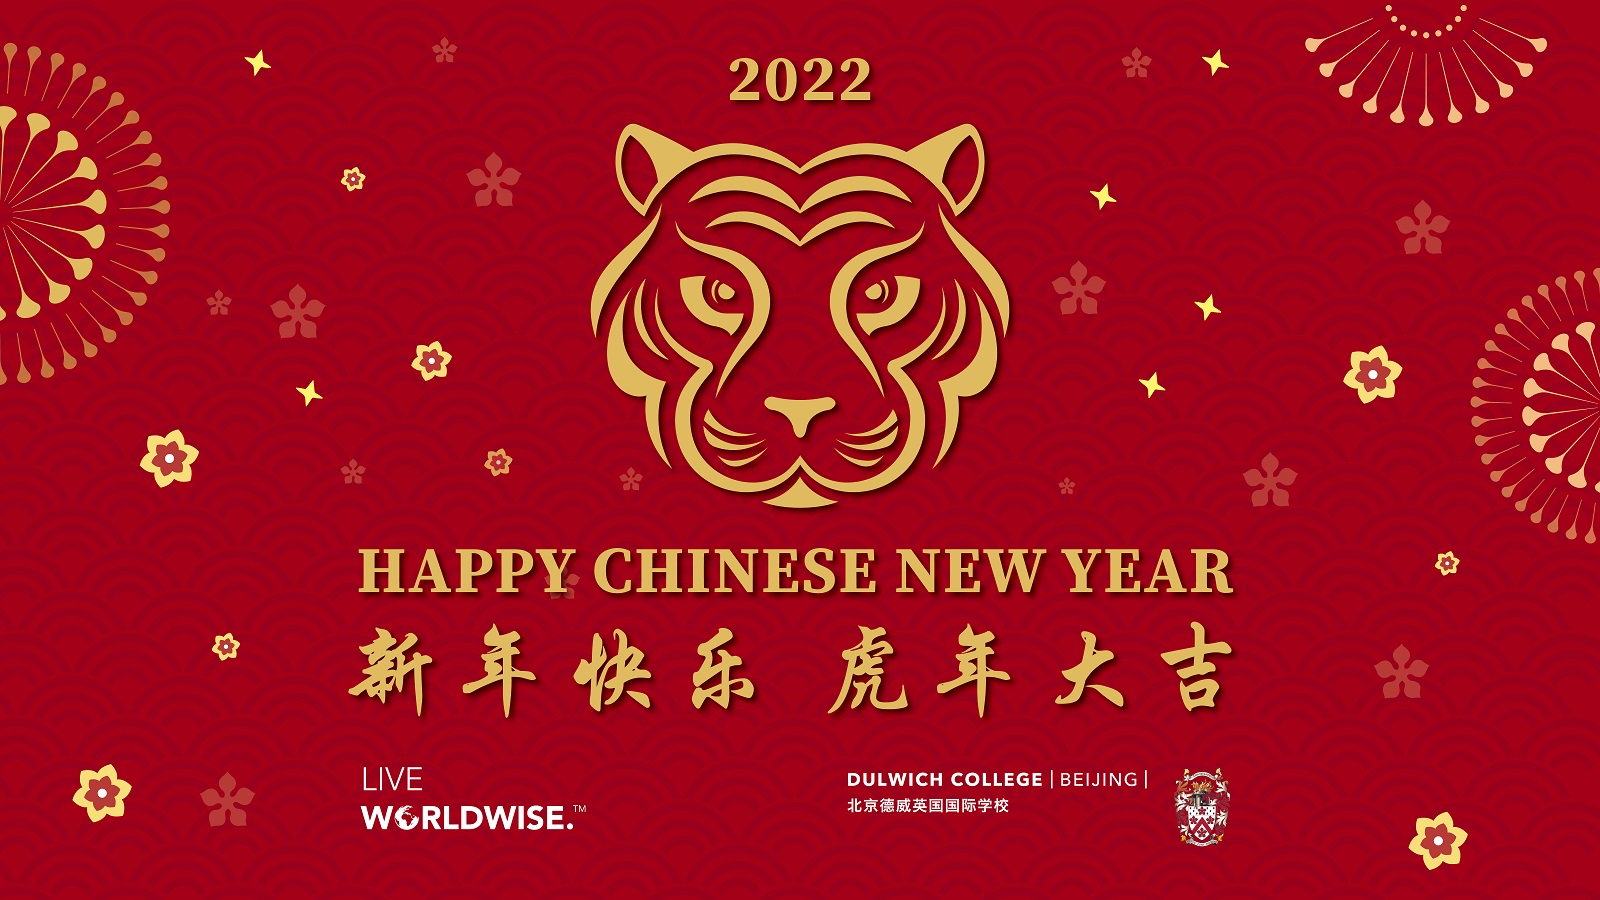 Chinese New Year e-card